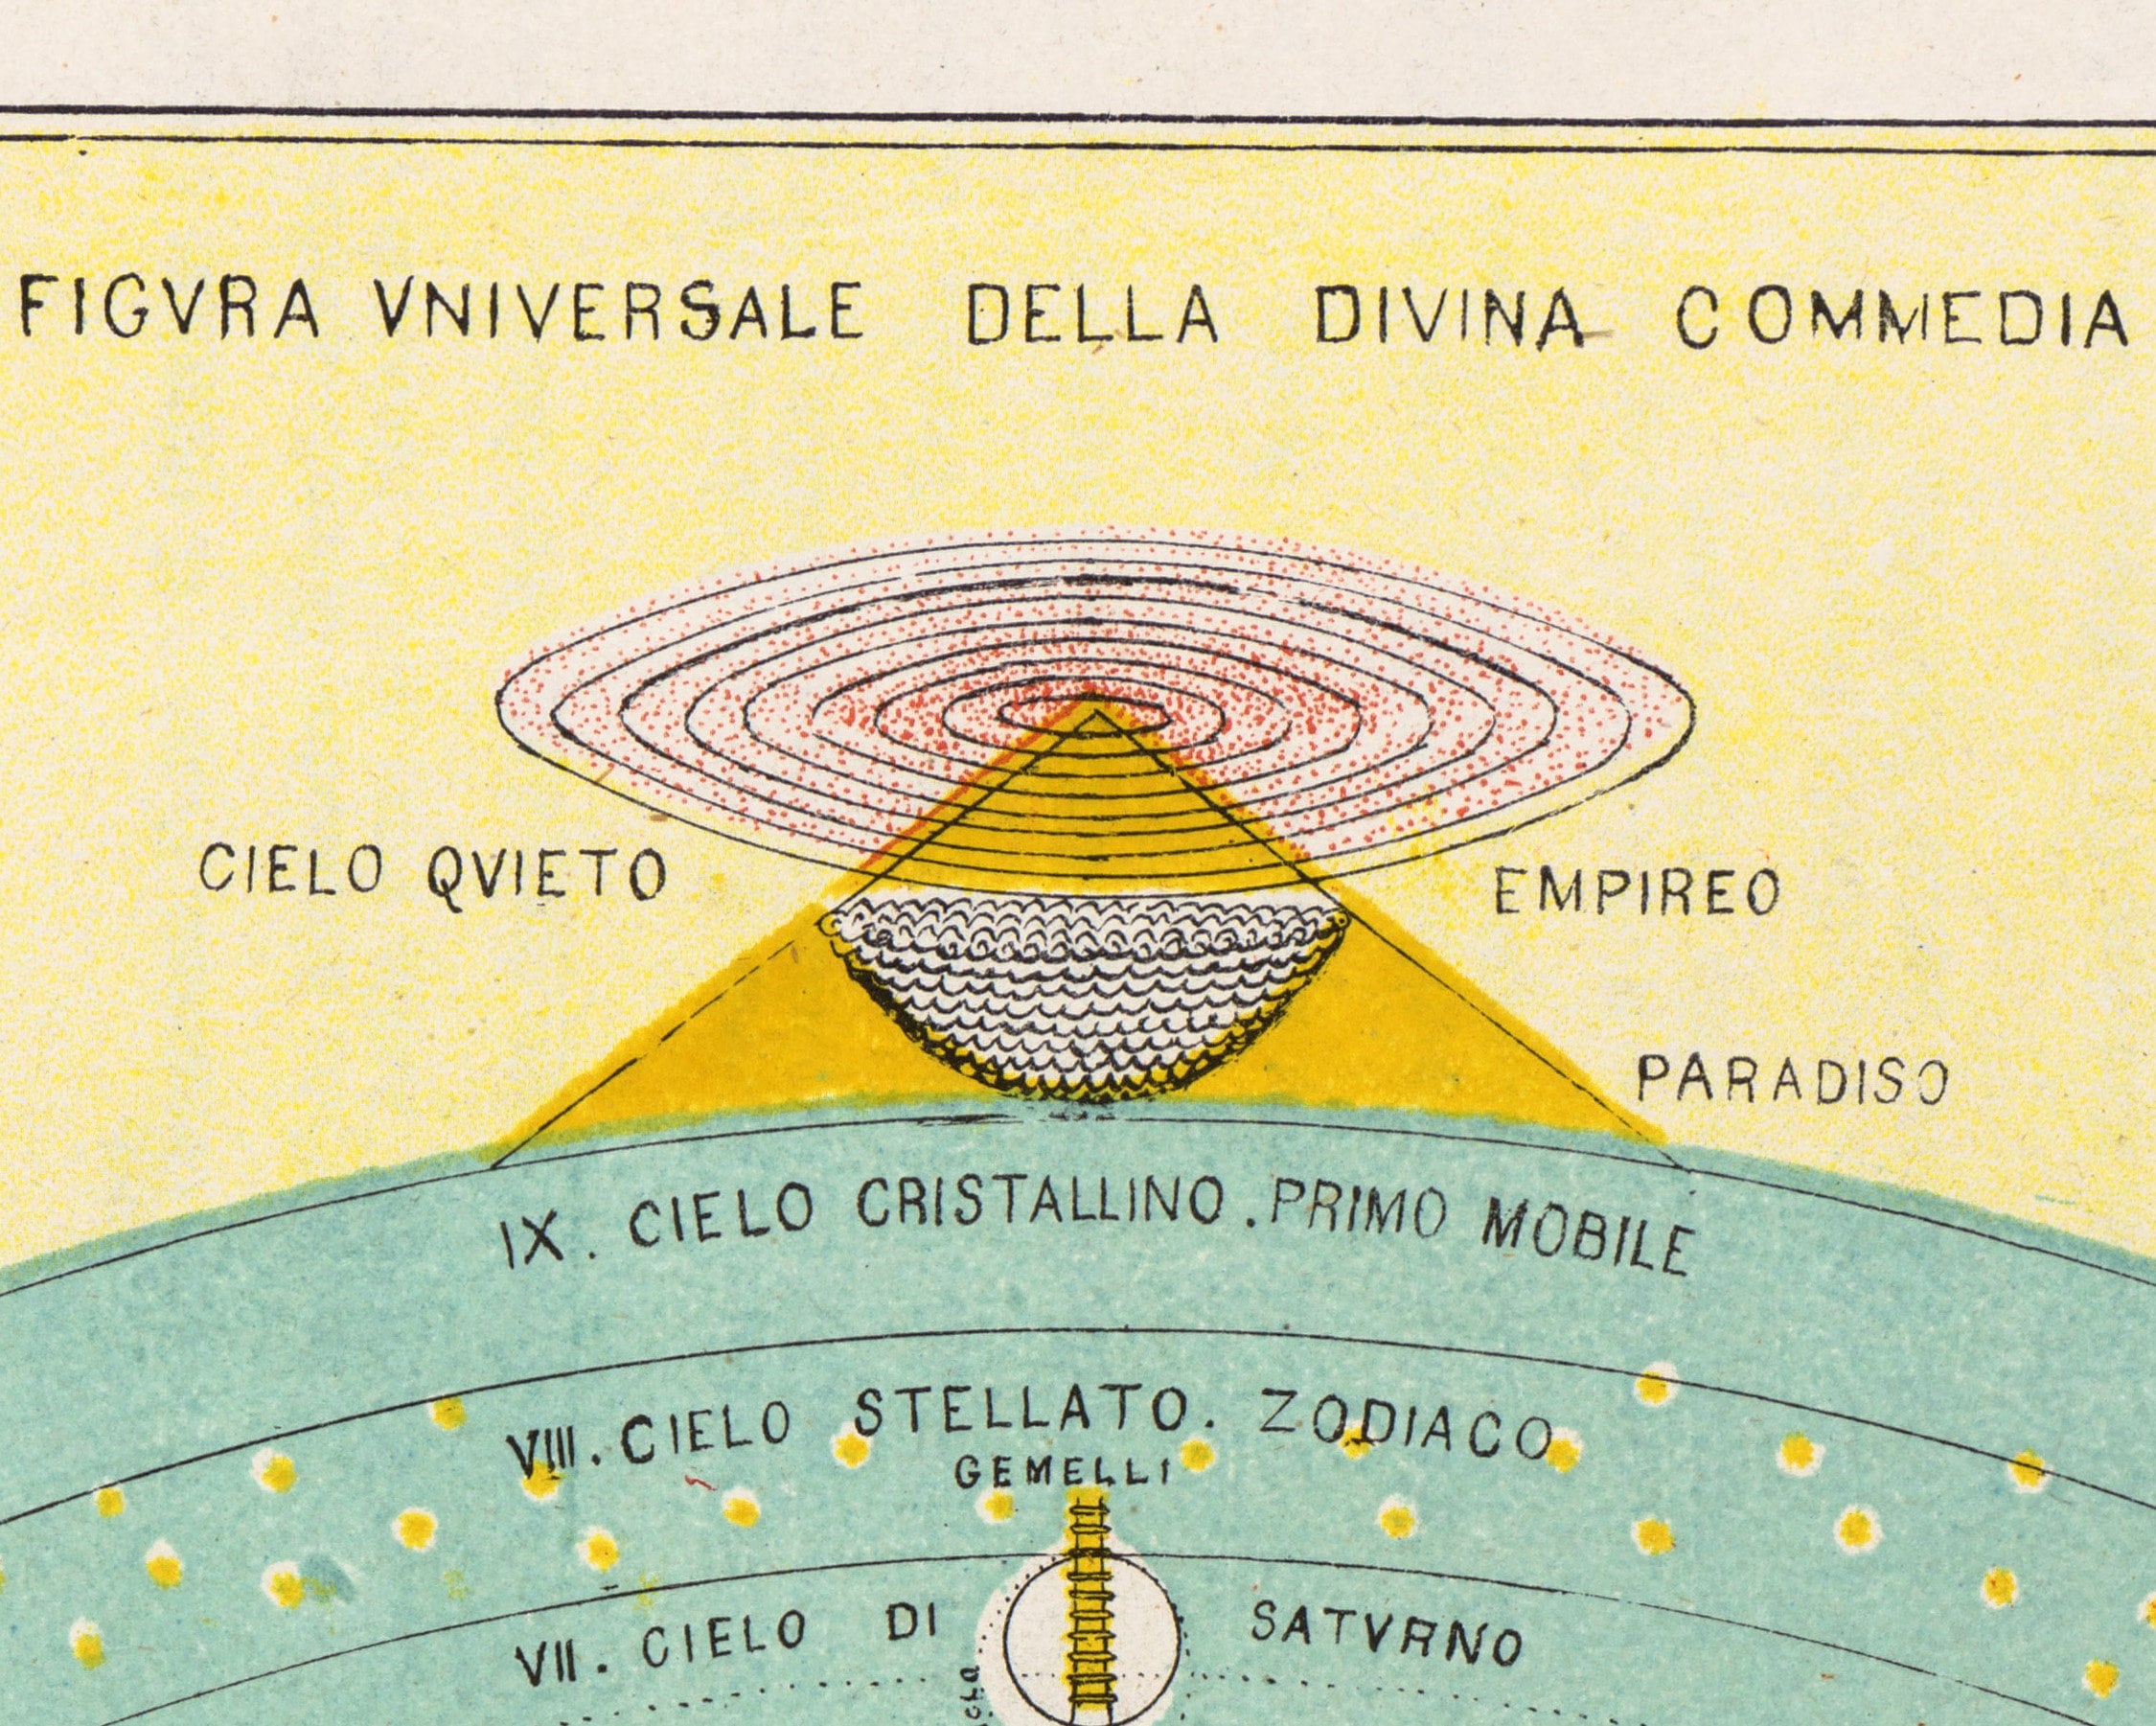 The world of Divine Comedy, as shown by Michelangelo Caetani, duca